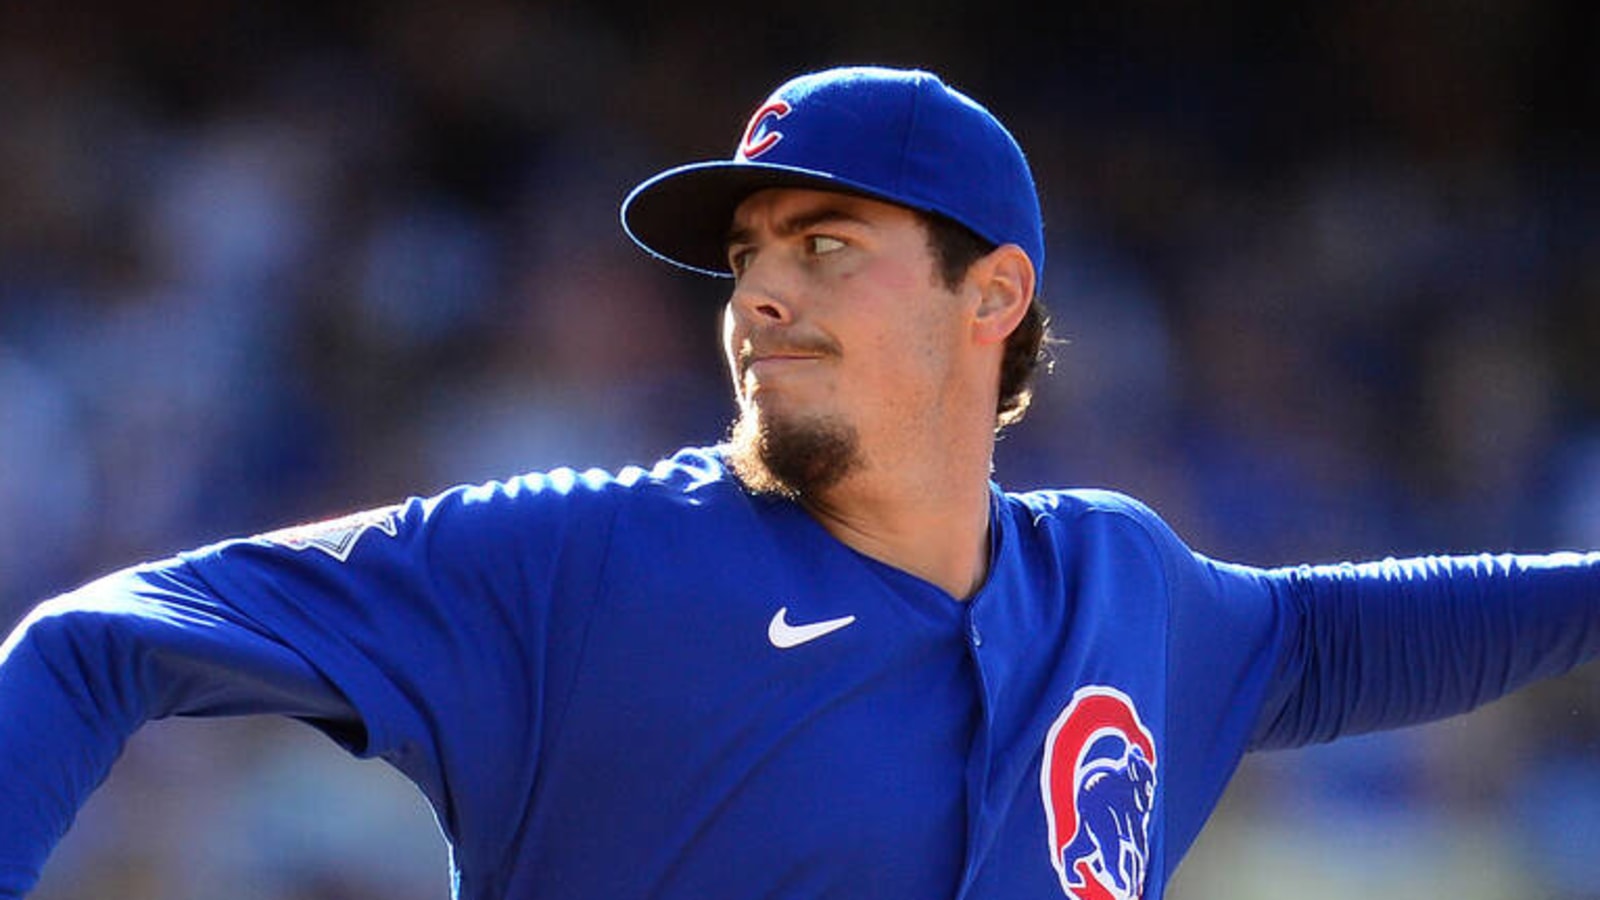 Cubs reliever Brad Wieck undergoes Tommy John surgery